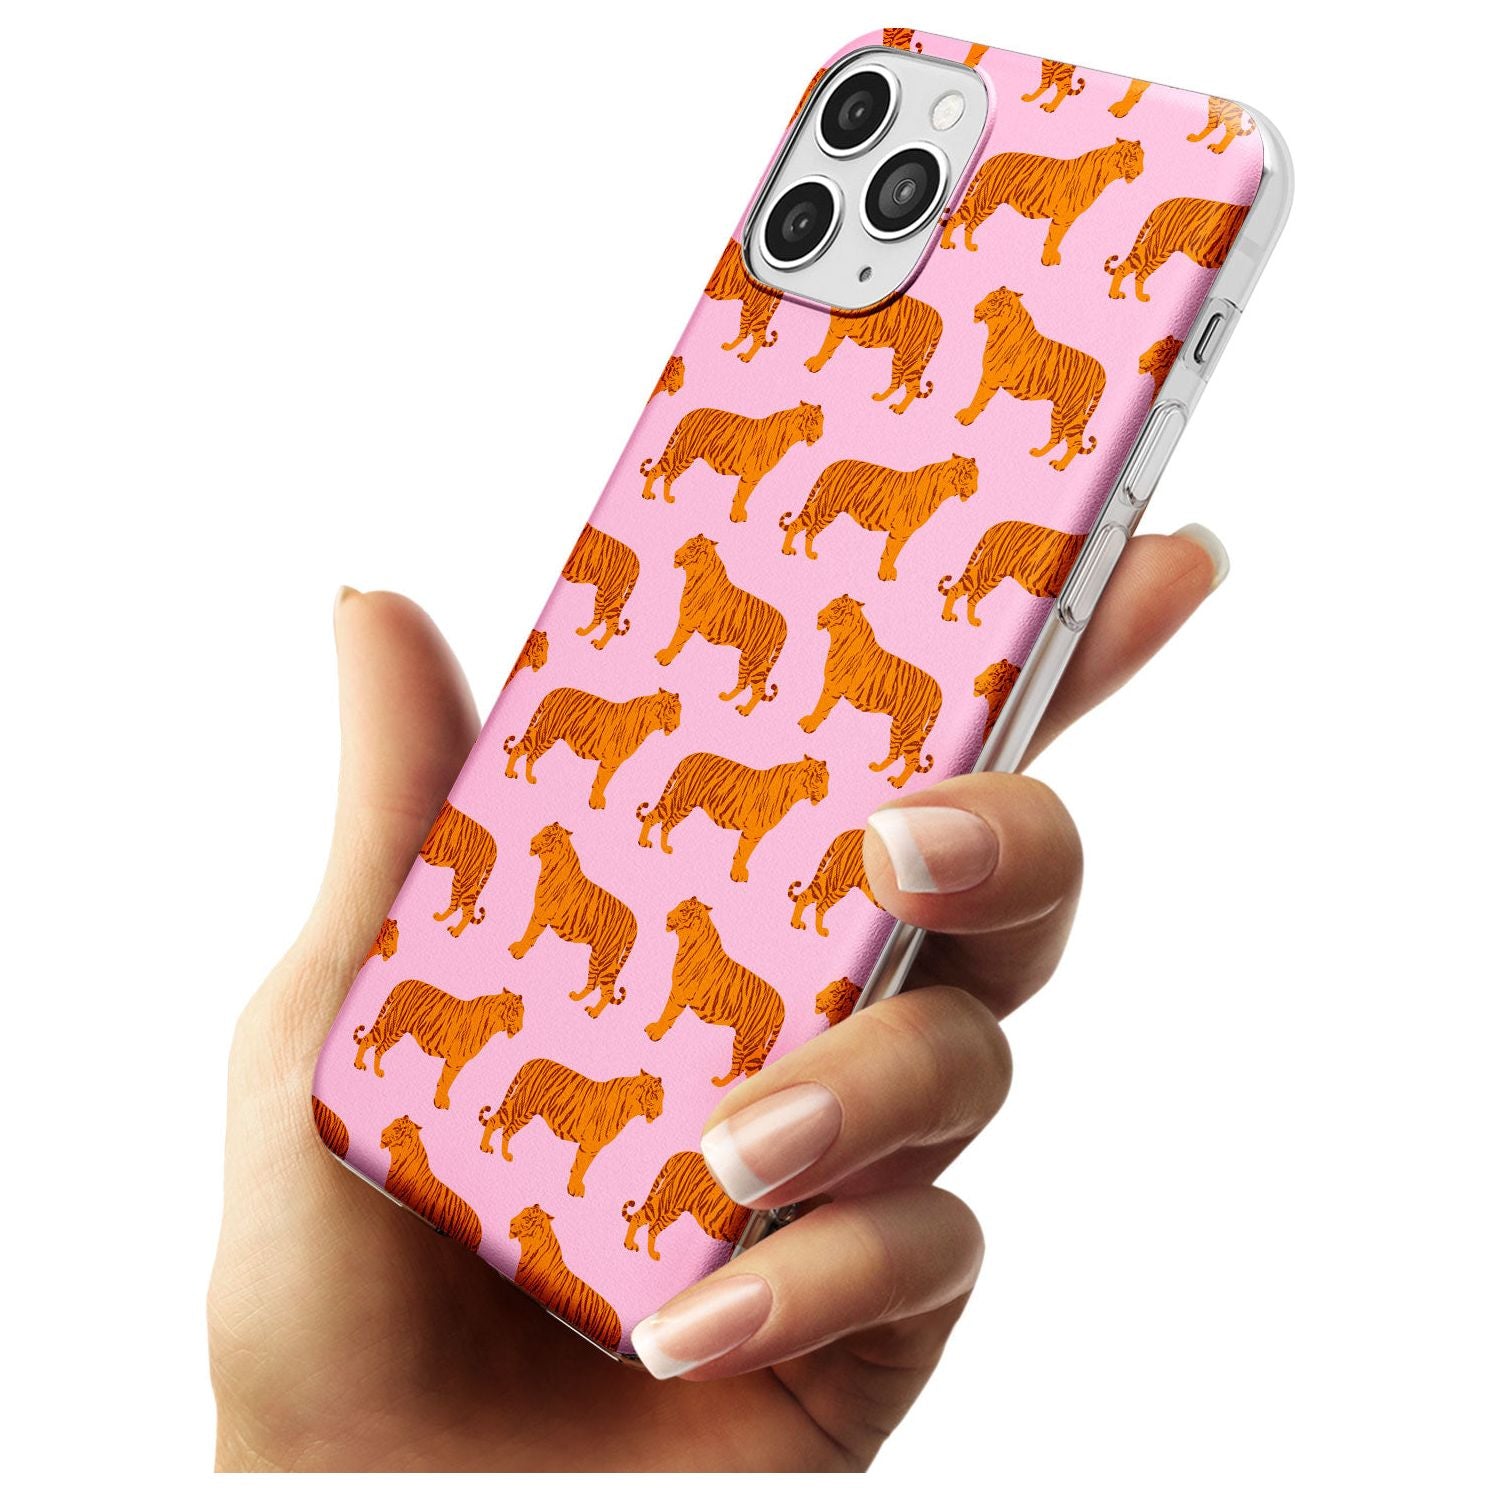 Tigers on Pink Pattern Slim TPU Phone Case for iPhone 11 Pro Max